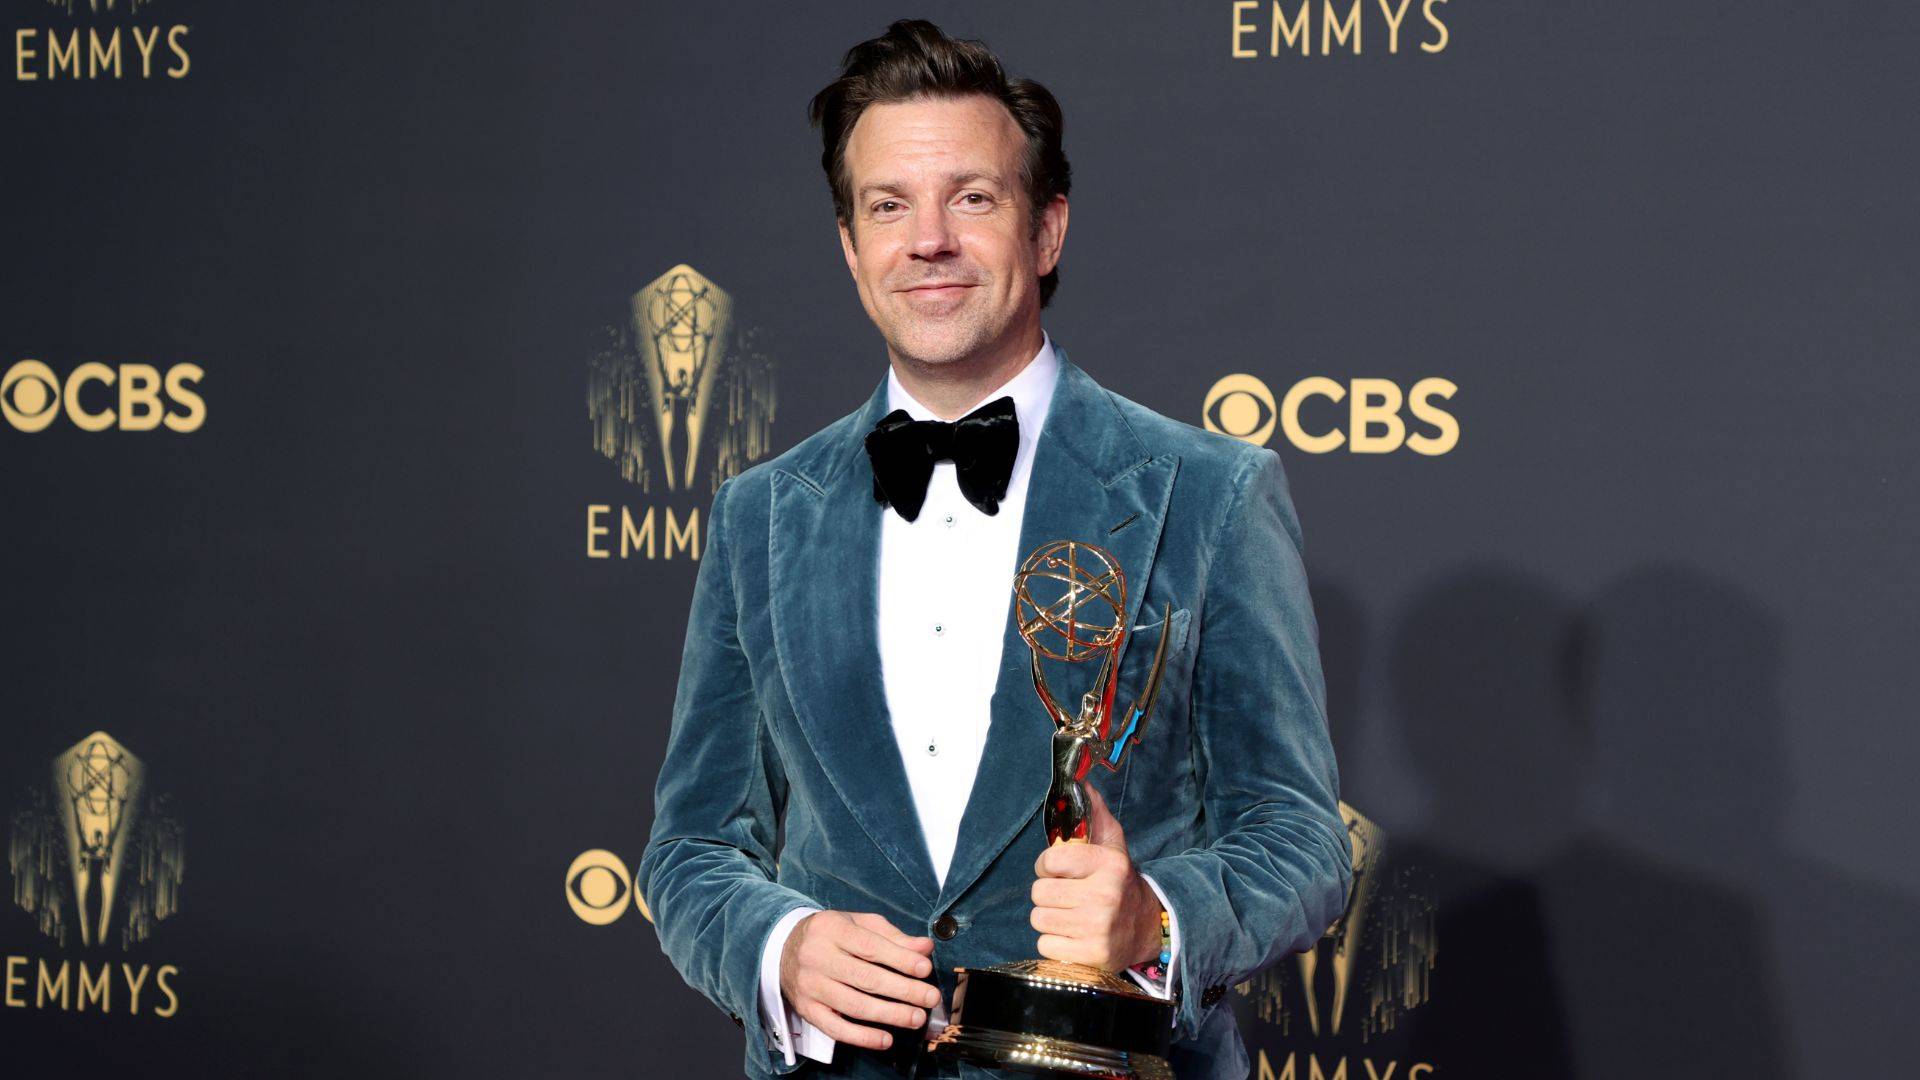 The 2021 Emmys Award Show winner Jason Sudeikis with trophy for Ted Lasso